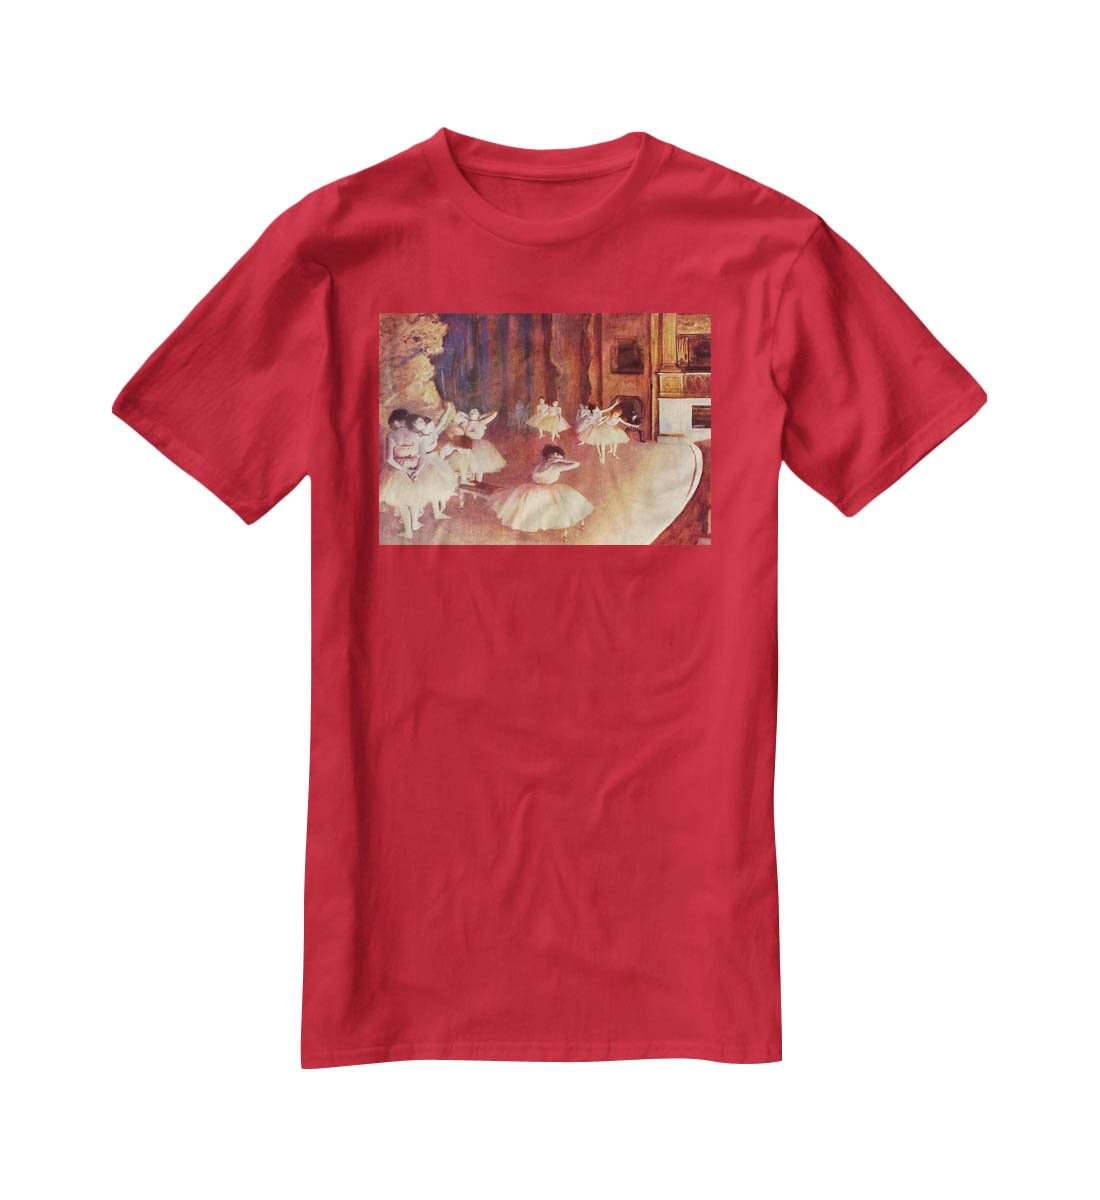 Dress rehearsal of the ballet on the stage by Degas T-Shirt - Canvas Art Rocks - 4